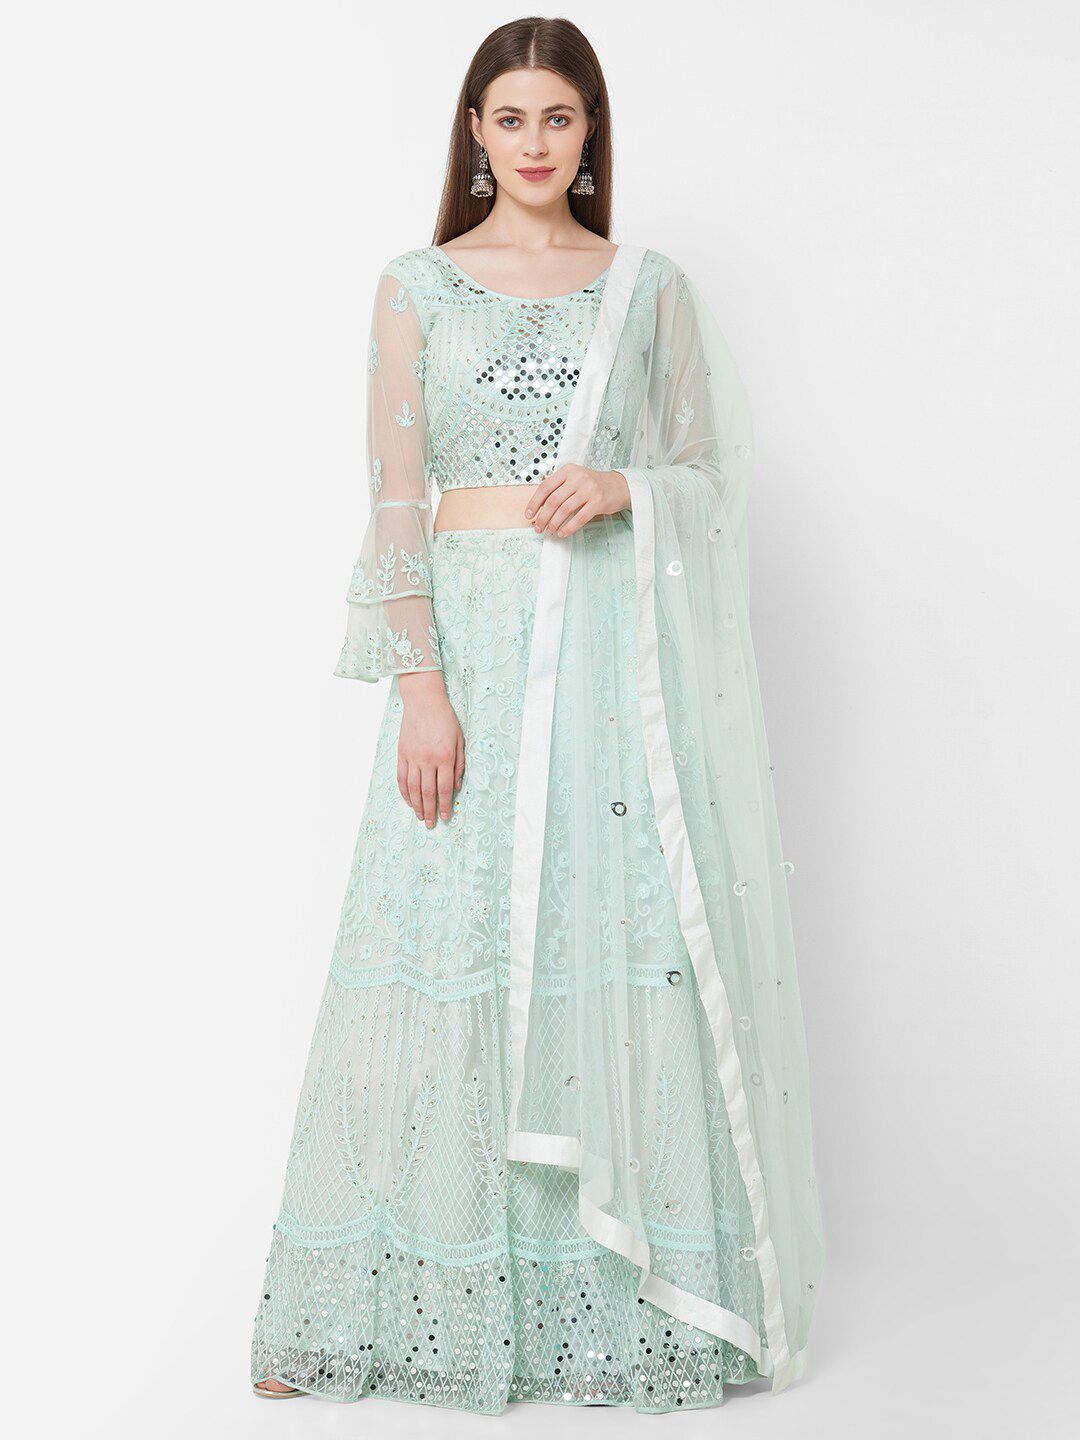 RedRound Turquoise Blue Embroidered Mirror Work Semi-Stitched Lehenga & Unstitched Blouse With Dupatta Price in India